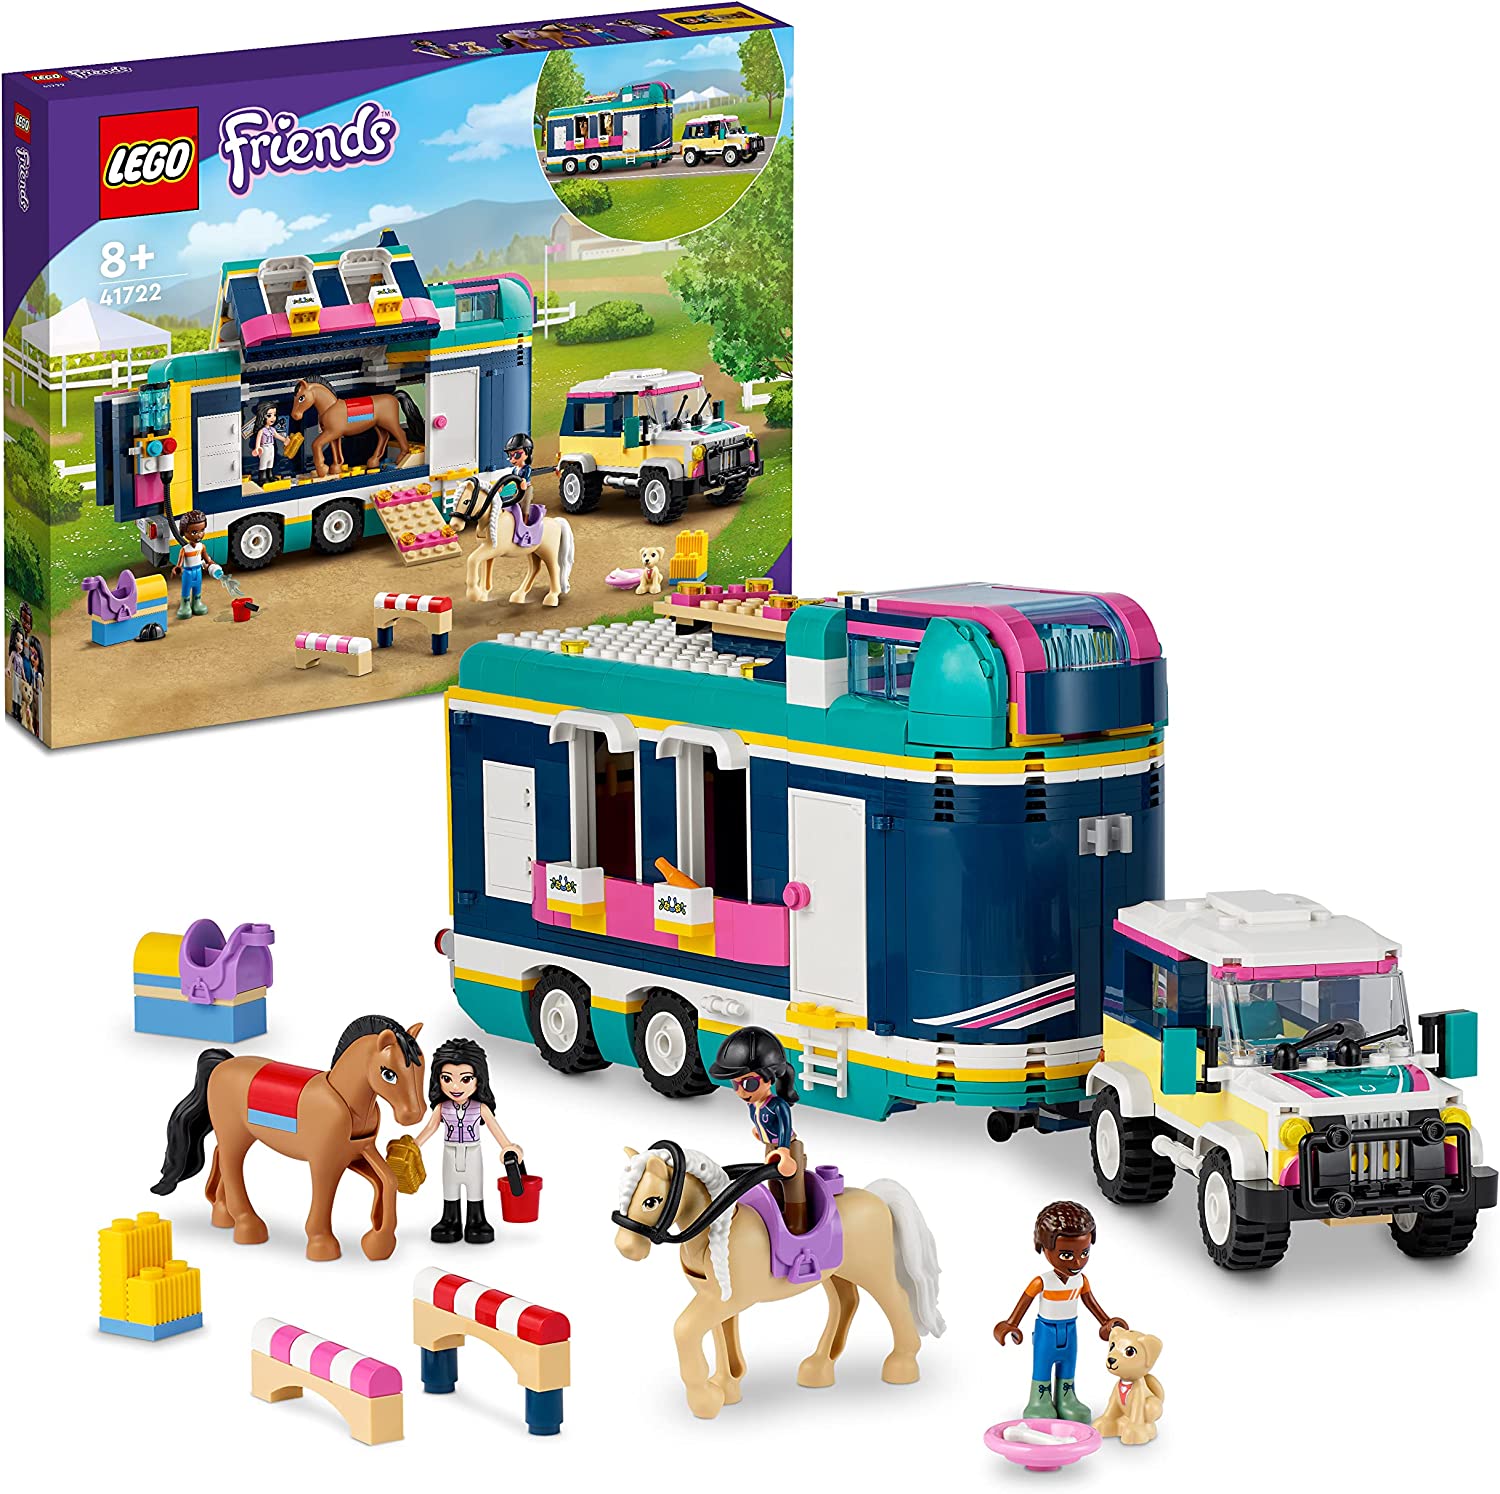 LEGO 41722 Friends Horse Trailer with Toy Car, 2 Horses as Animal Figures and Riding Accessories, Set for Children from 8 Years